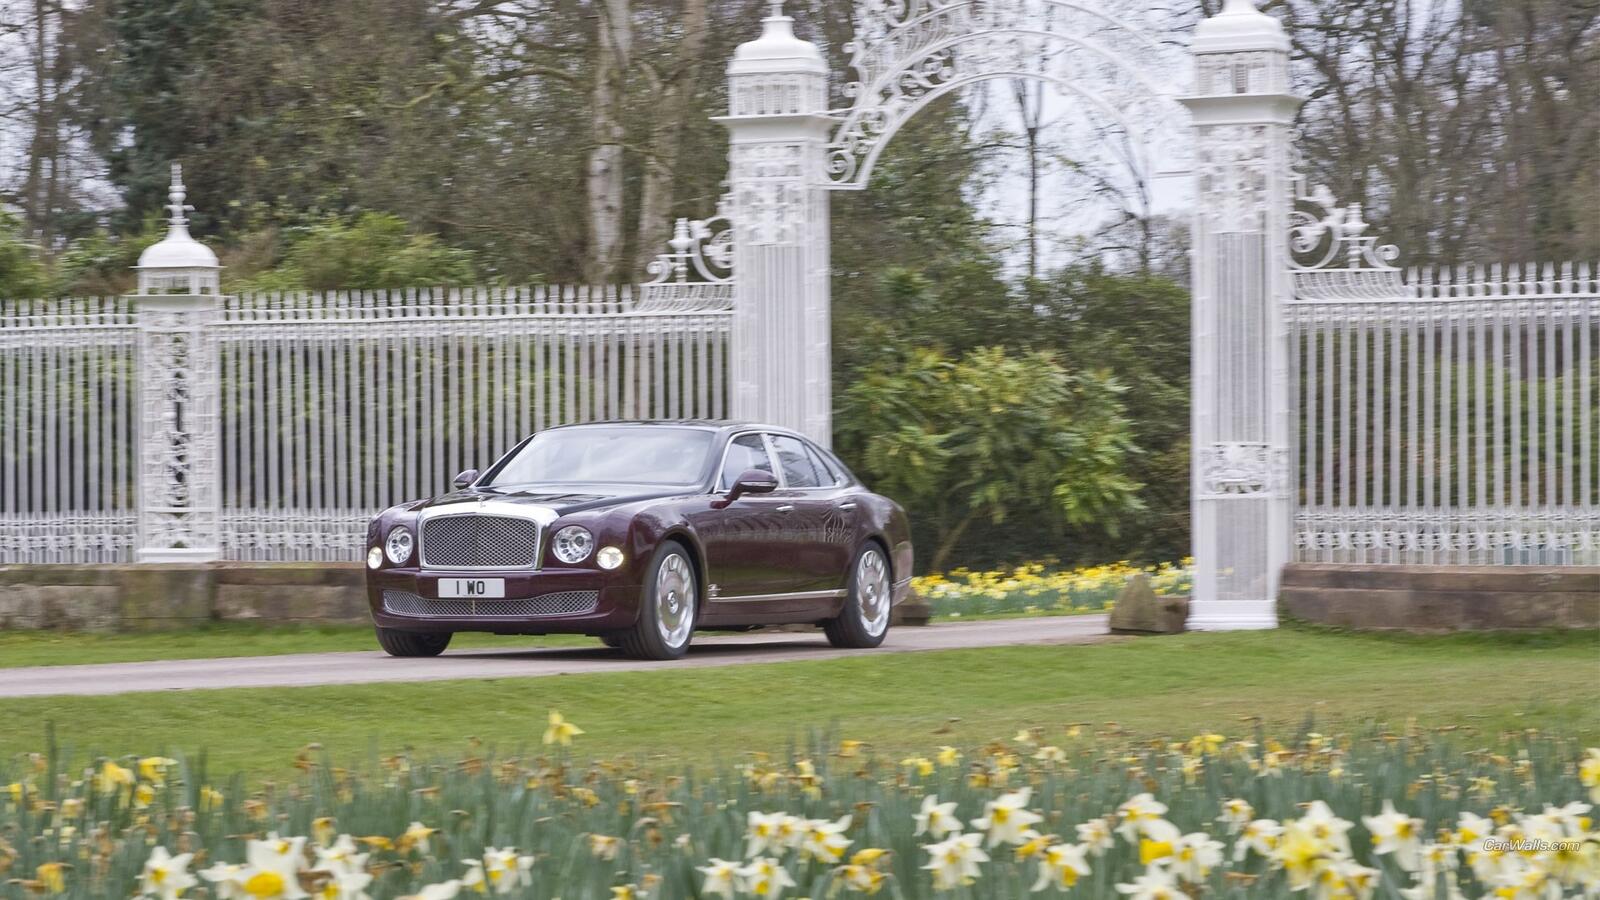 Free photo Bentley Mulsanne in the grounds of the mansion.